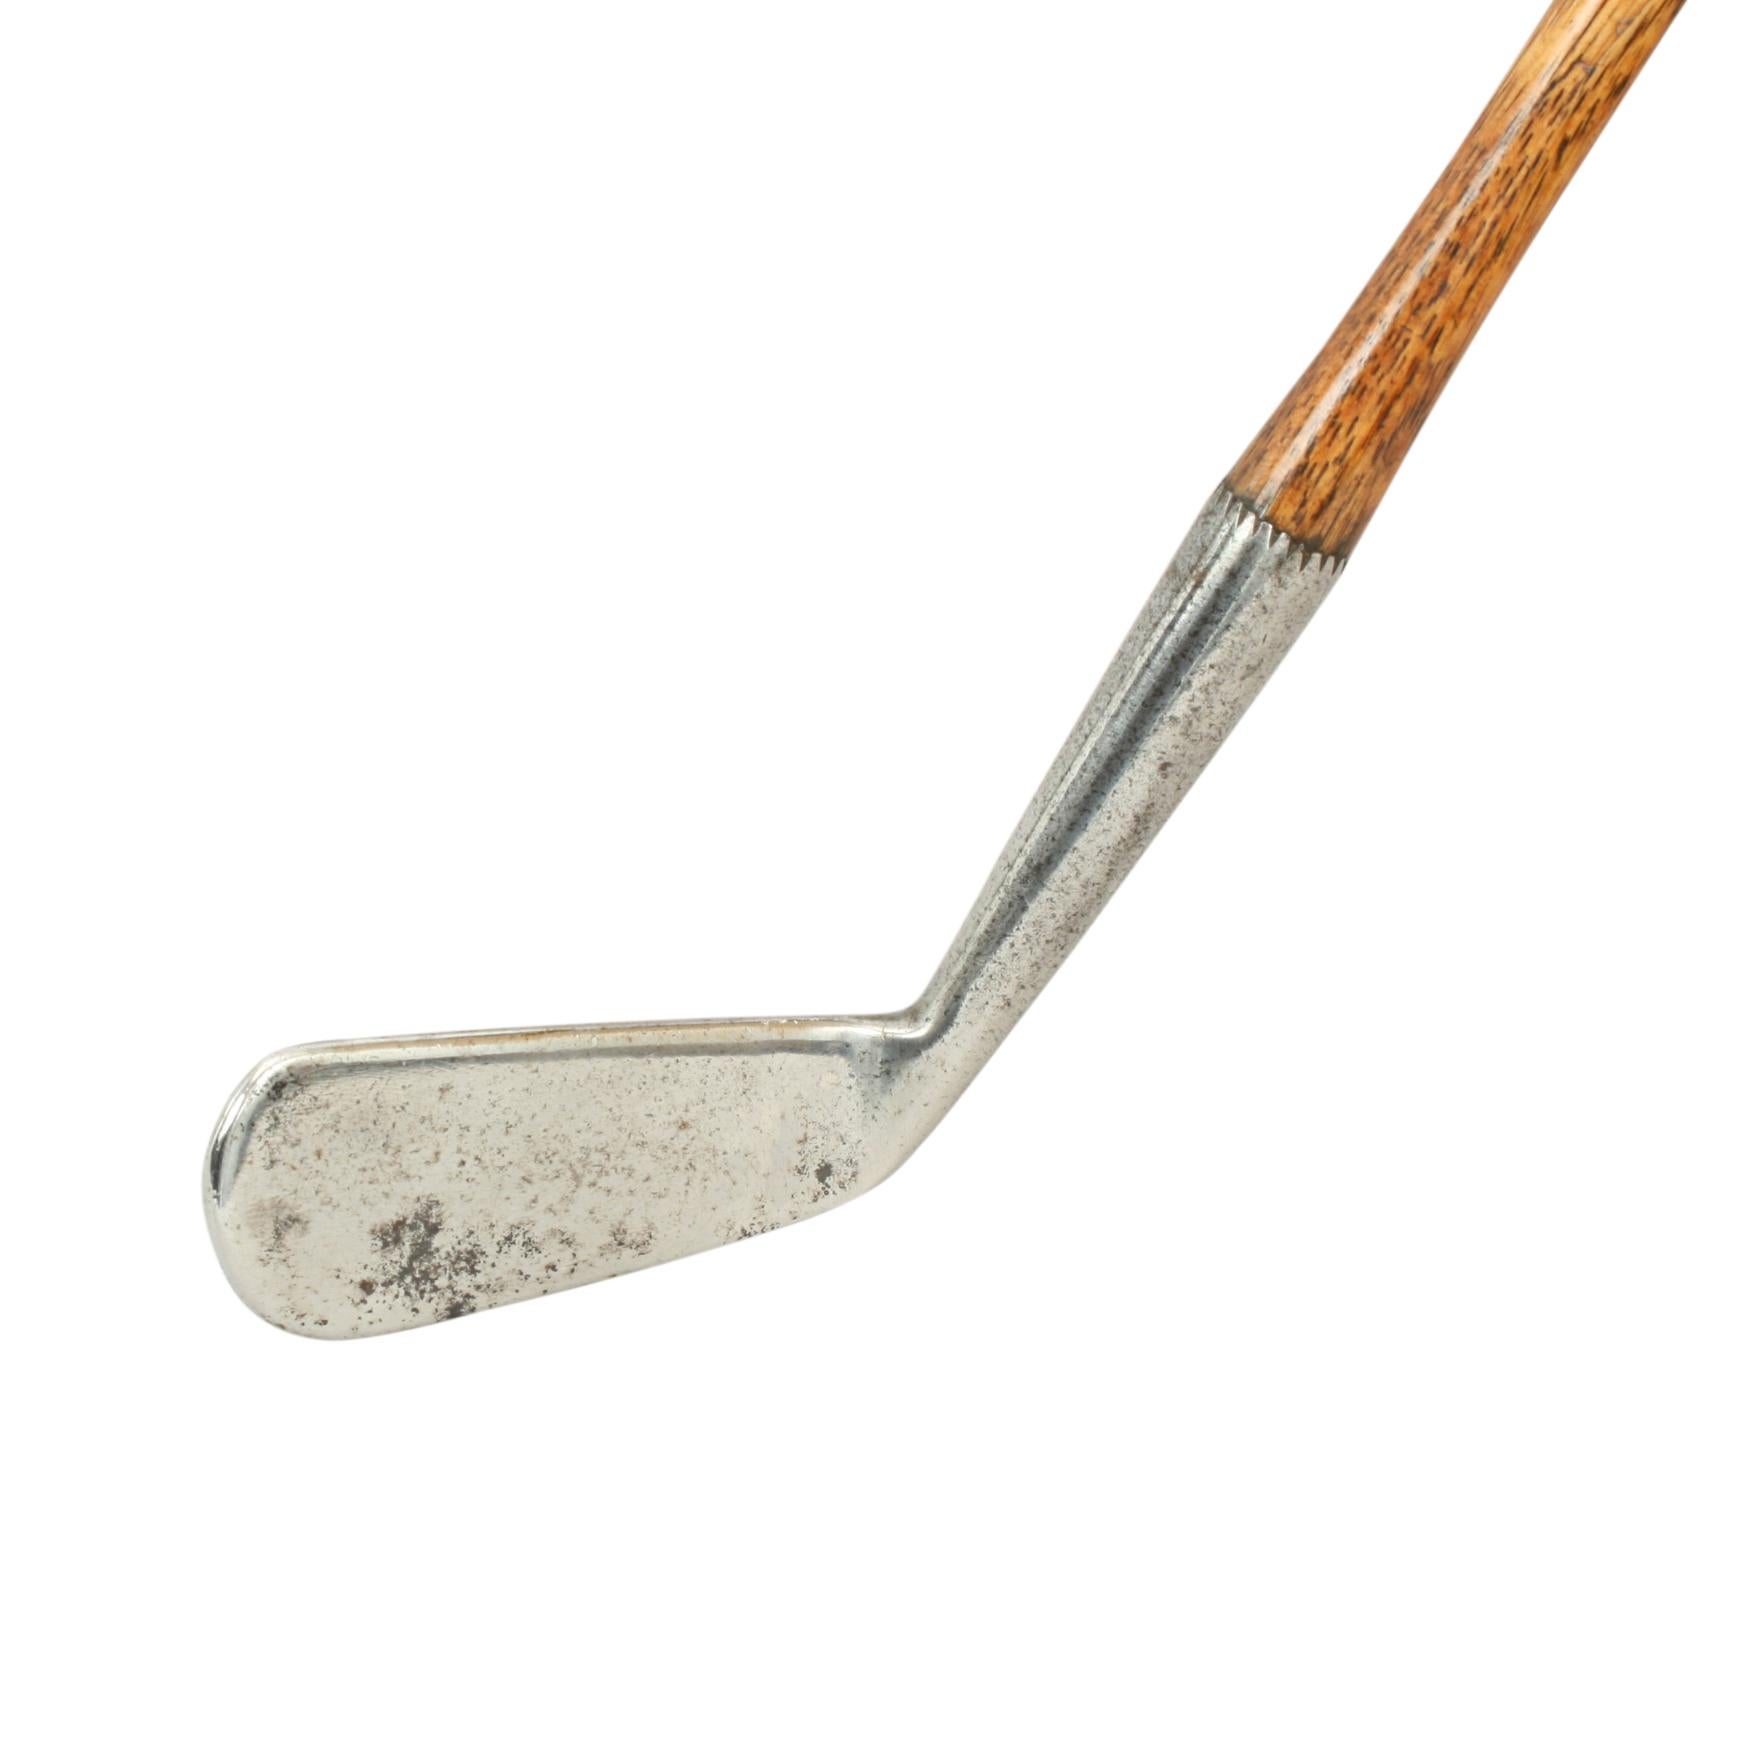 Hickory Shafted Golf Club